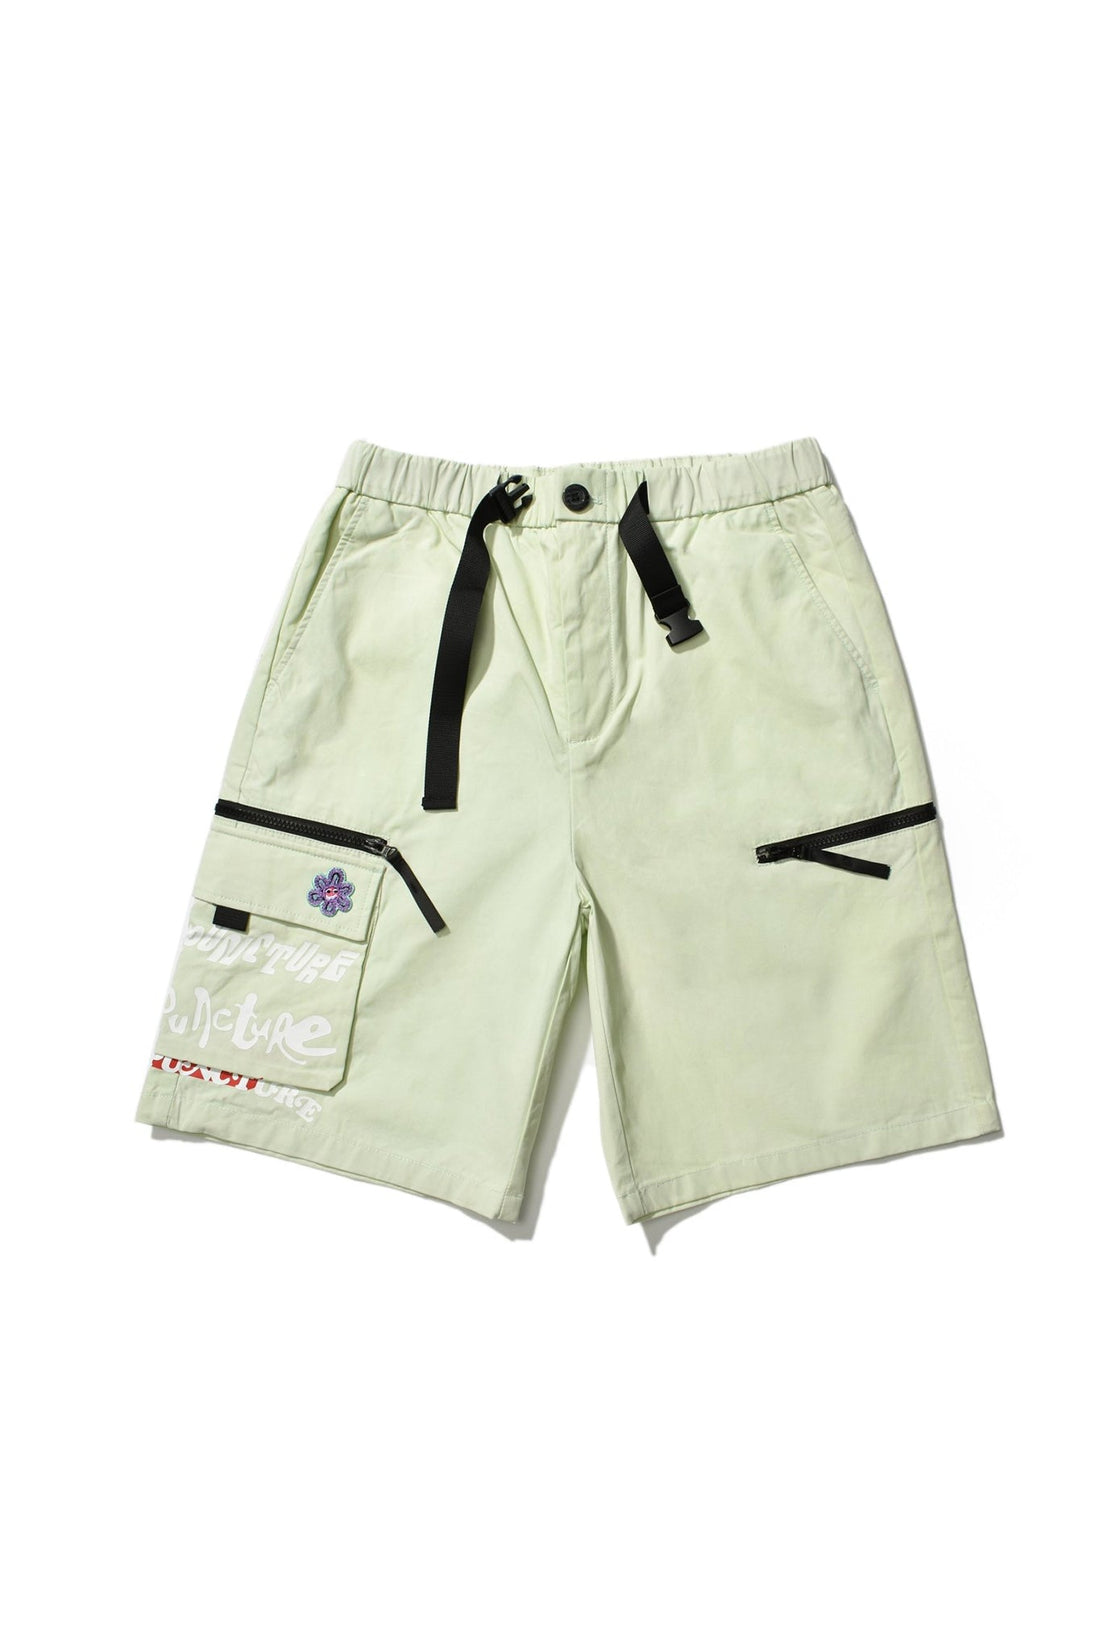 UNION SHORTS GREEN Acupuncture